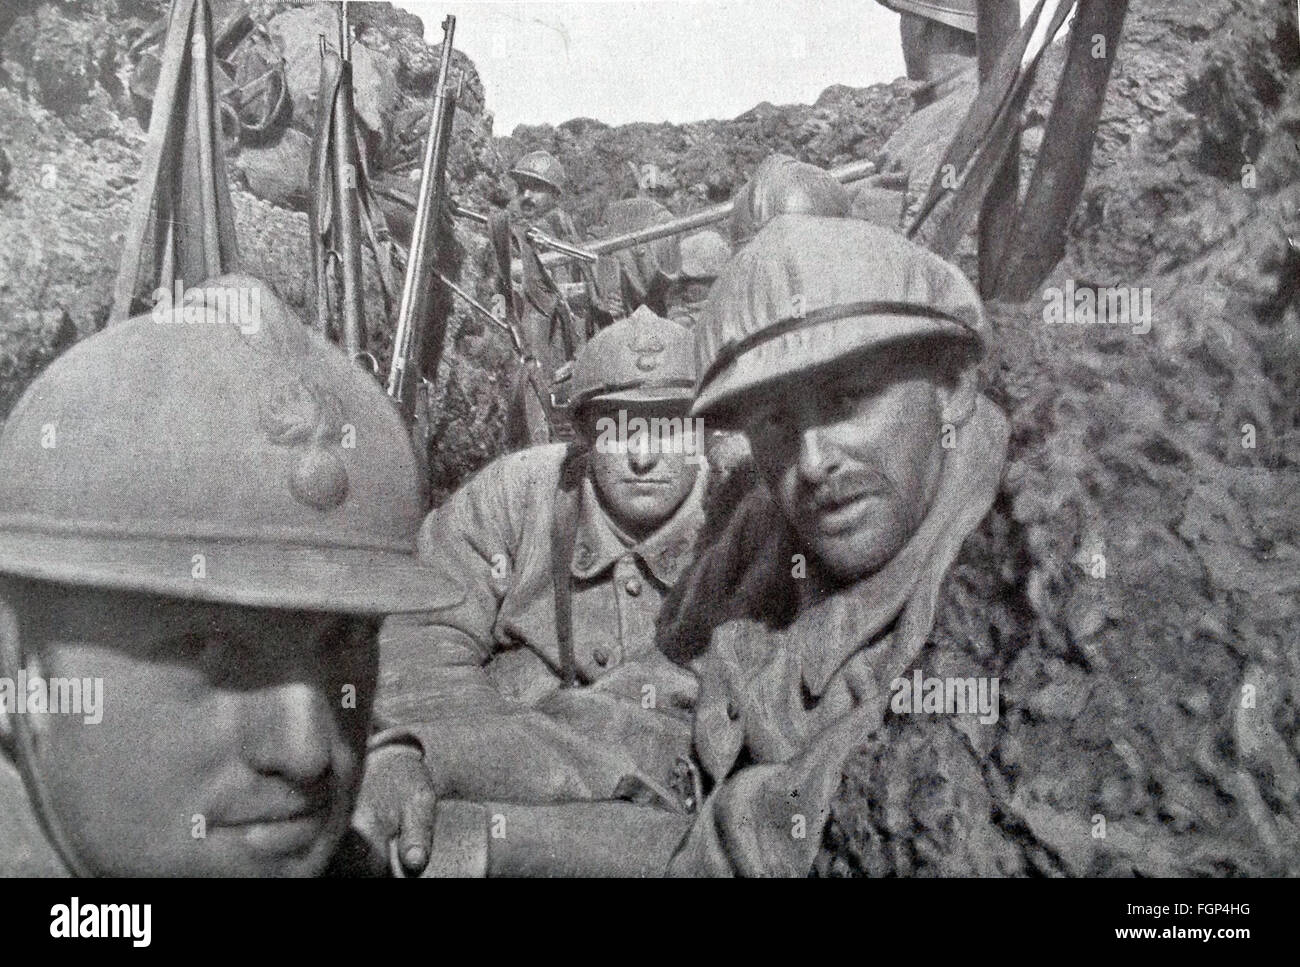 Battle of Verdun 1916 - Soldiers in a trench Stock Photo